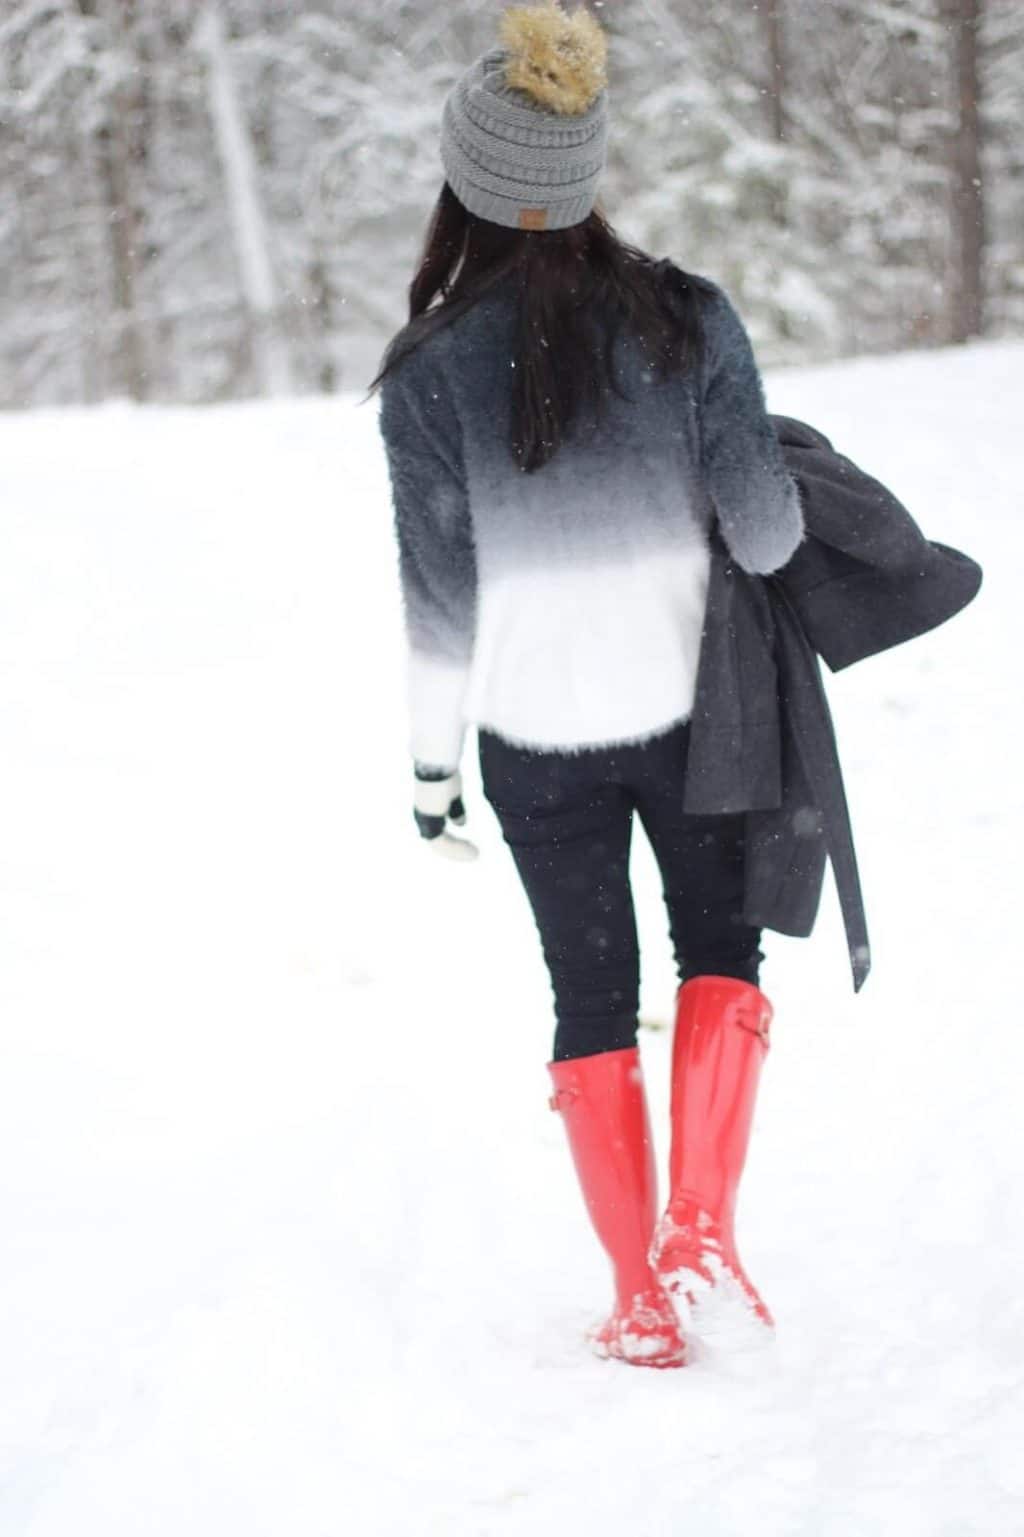 Ombre fuzzy sweater with distressed black denim is a good snow outfit paired with red Hunter Boots